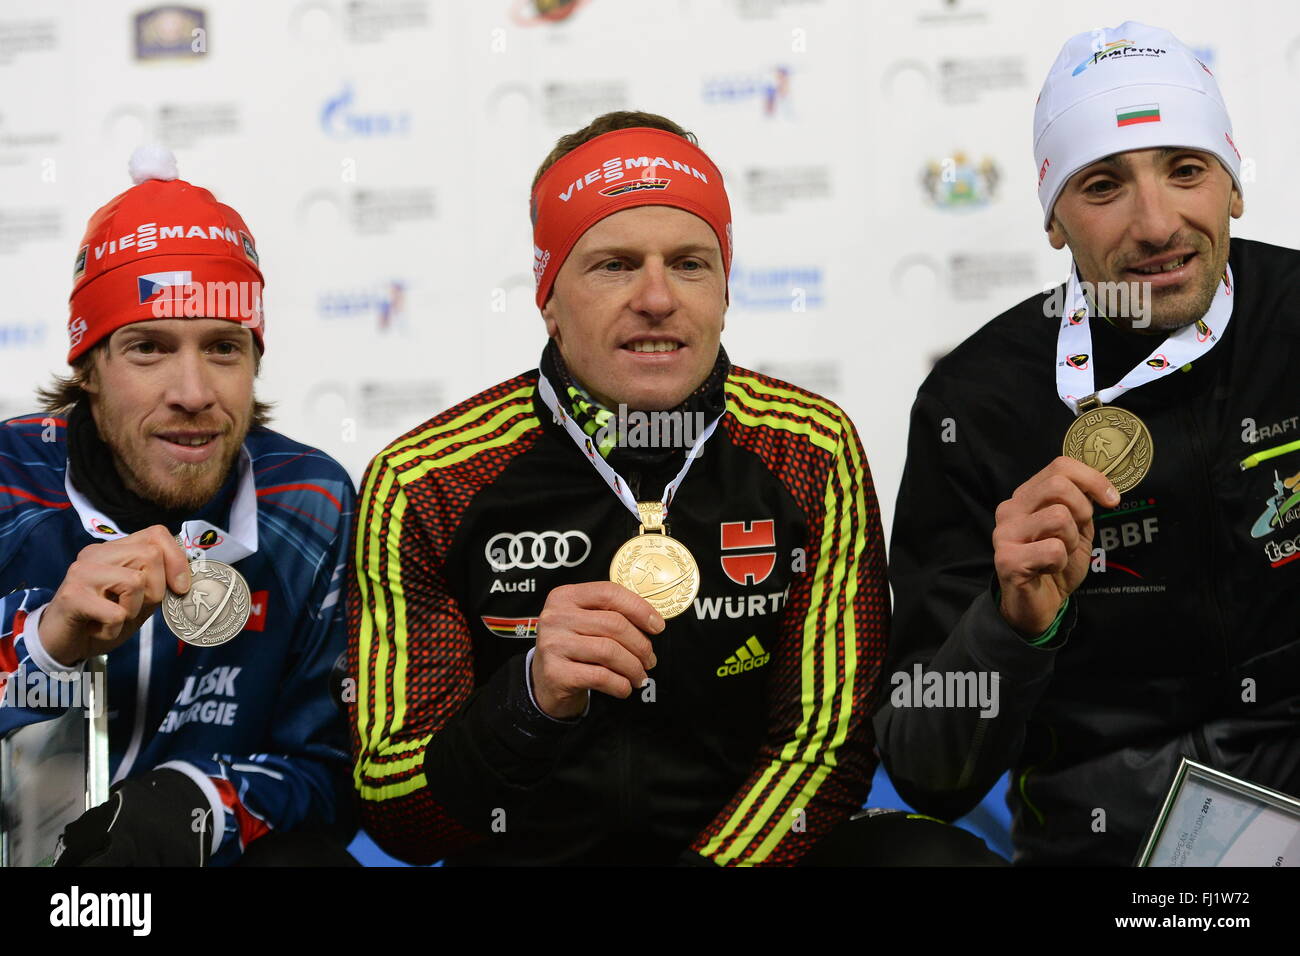 Gold Medallist Czech High Resolution Stock Photography and Images - Alamy